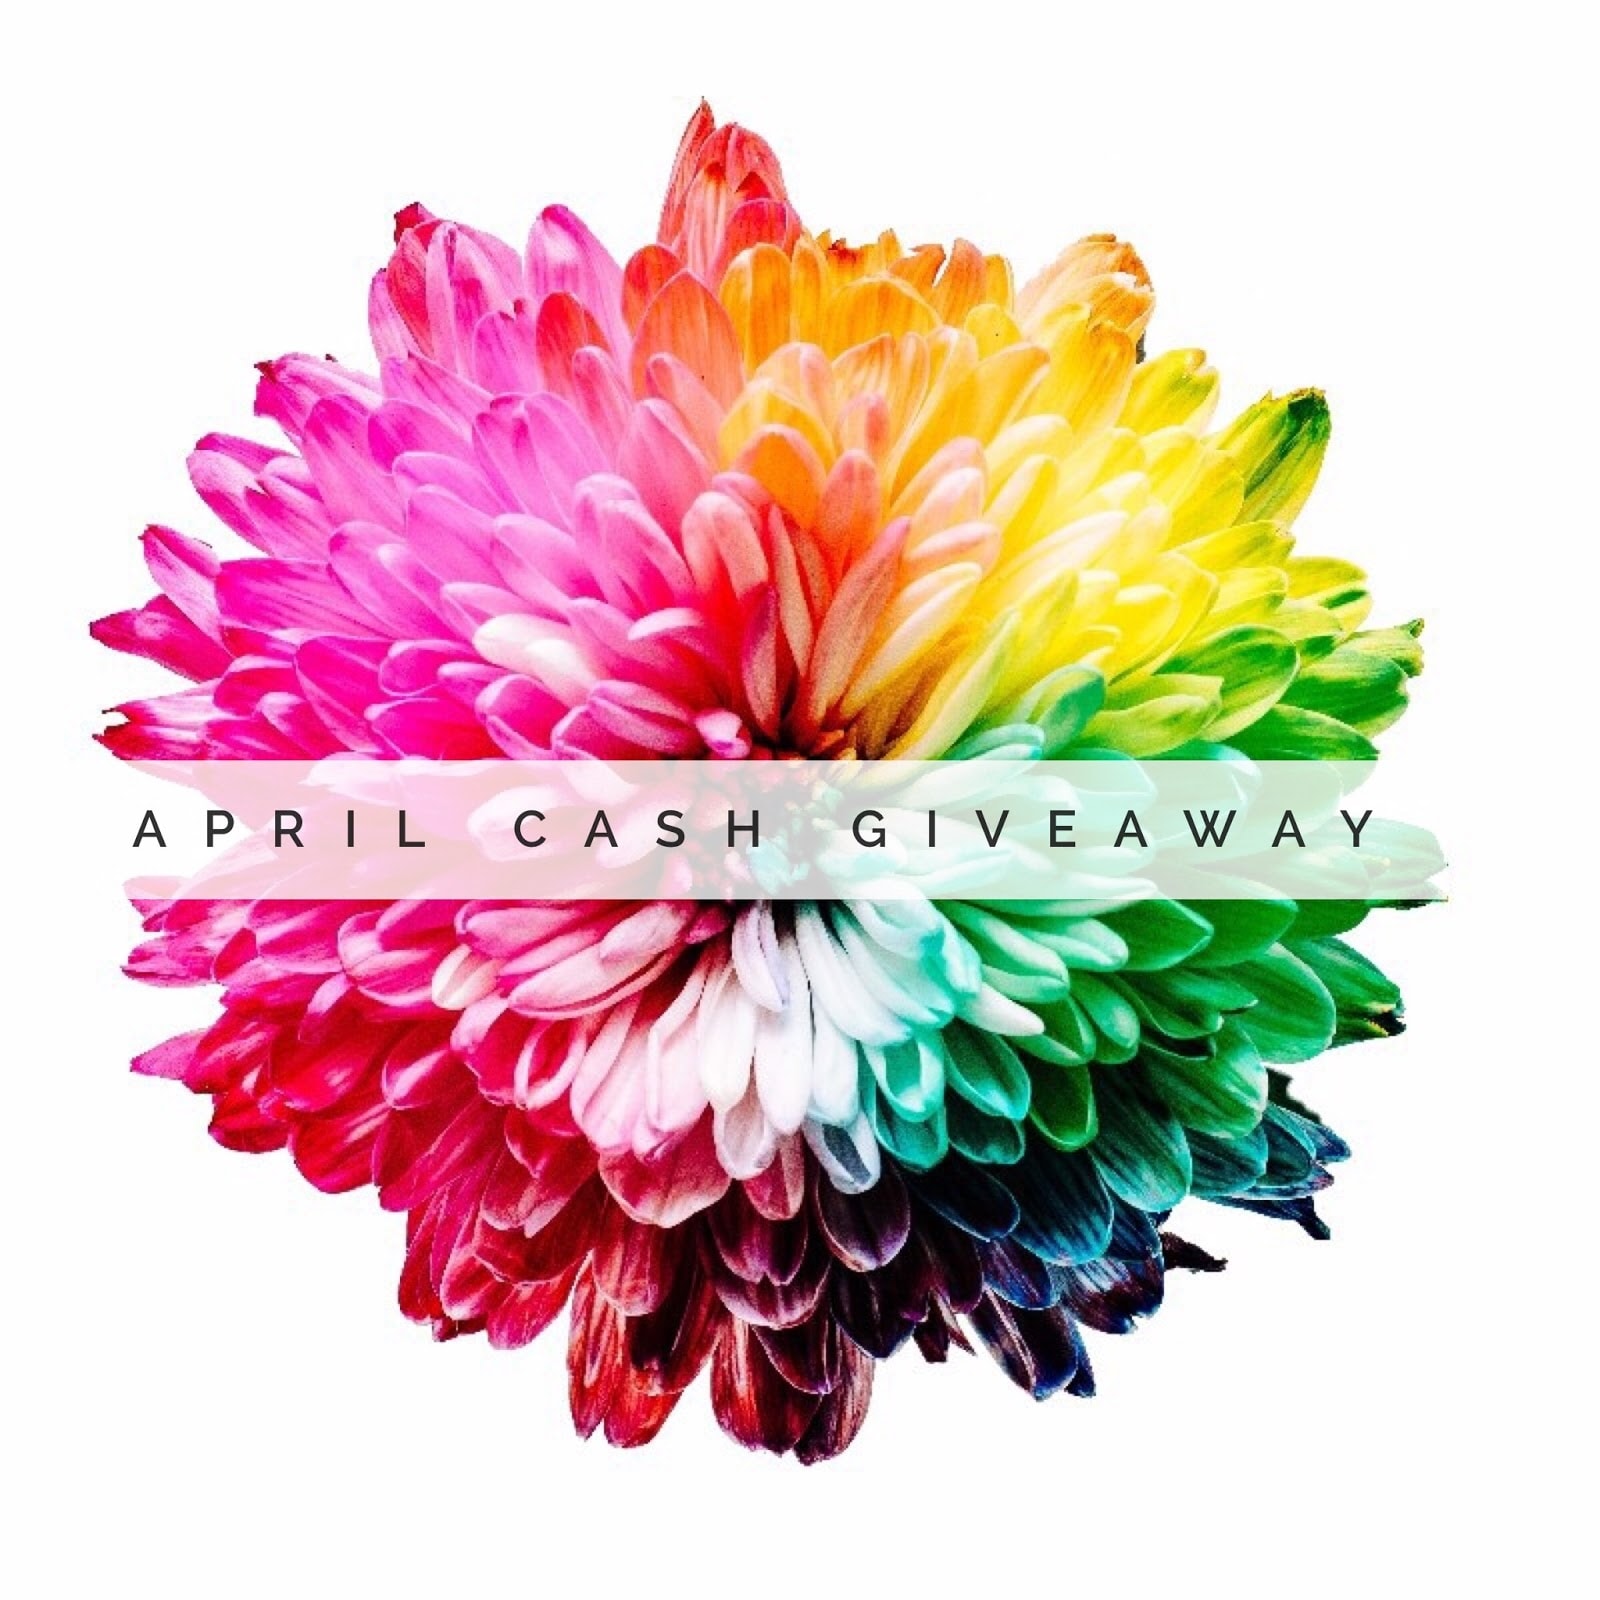 April Cash Giveaway ends May 9, 2018